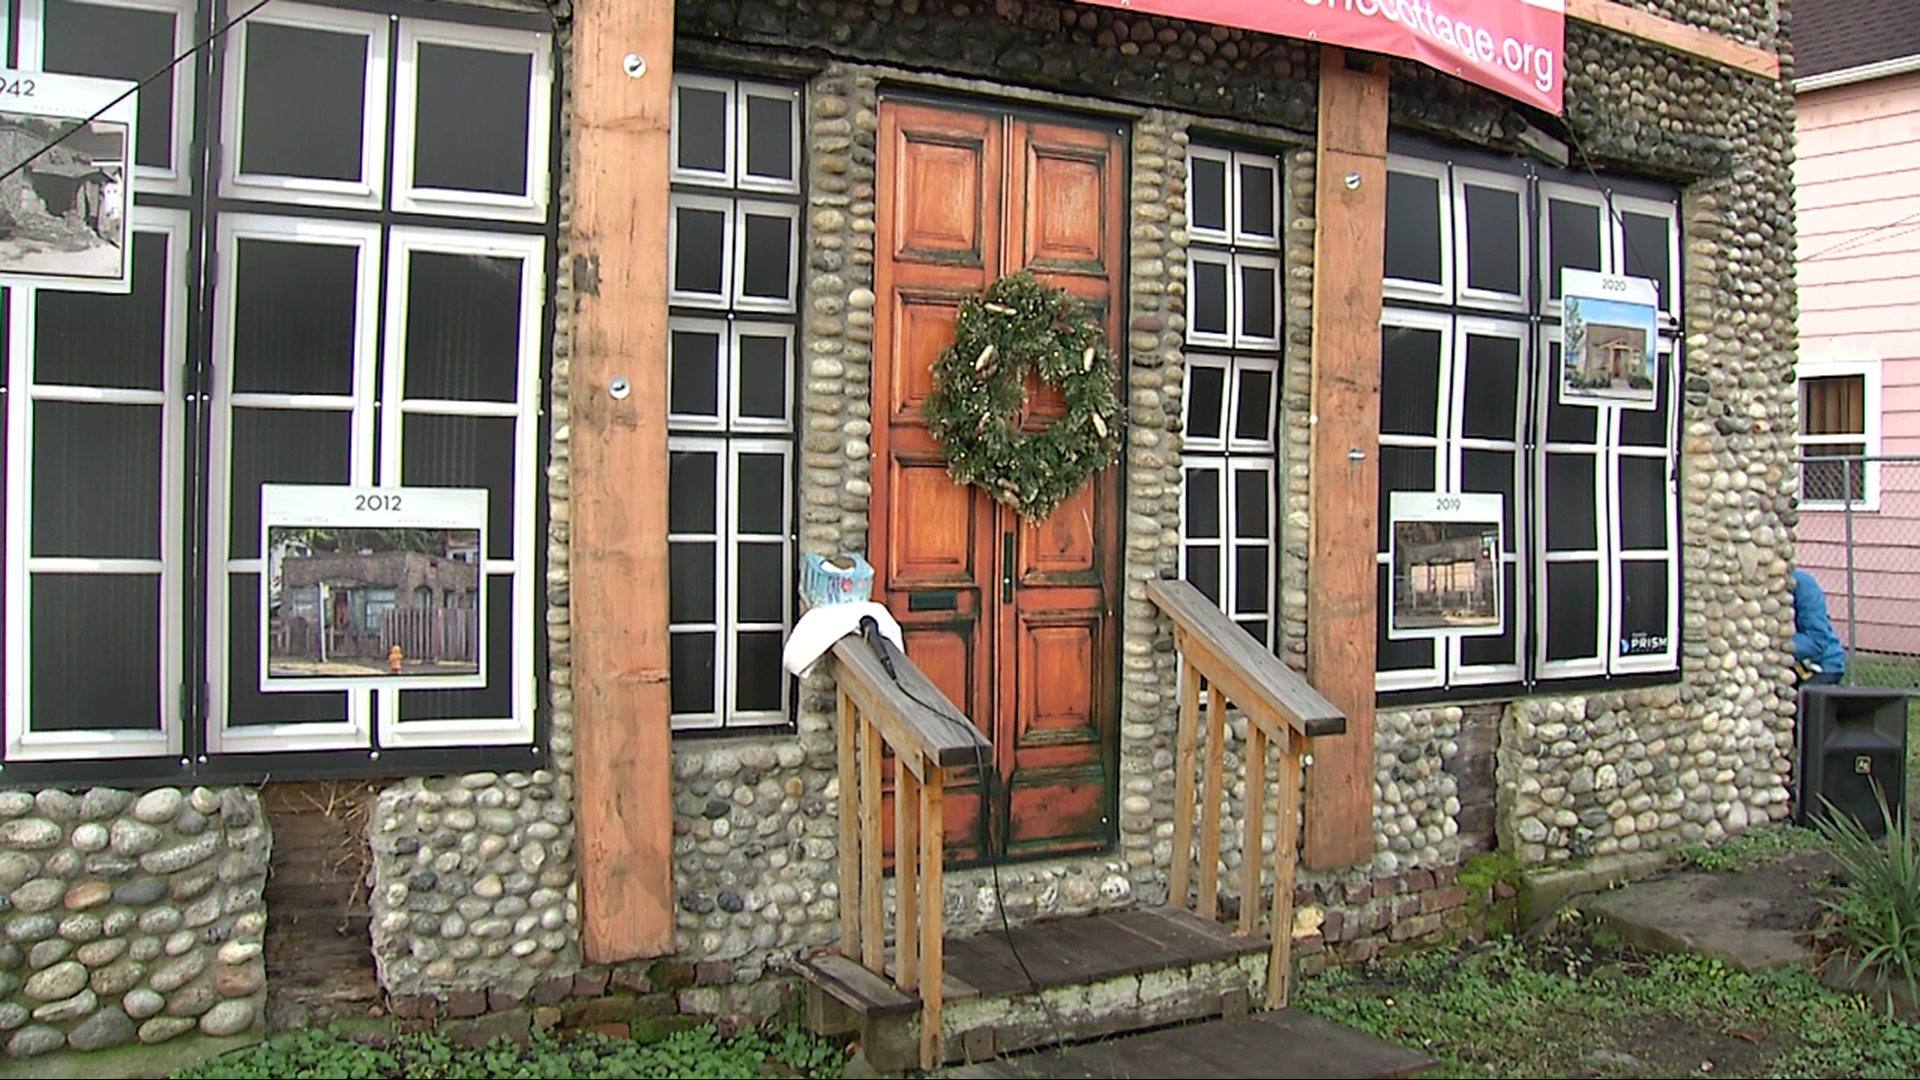 The depression-era home was built by hand using stones gathered from Alki Beach.